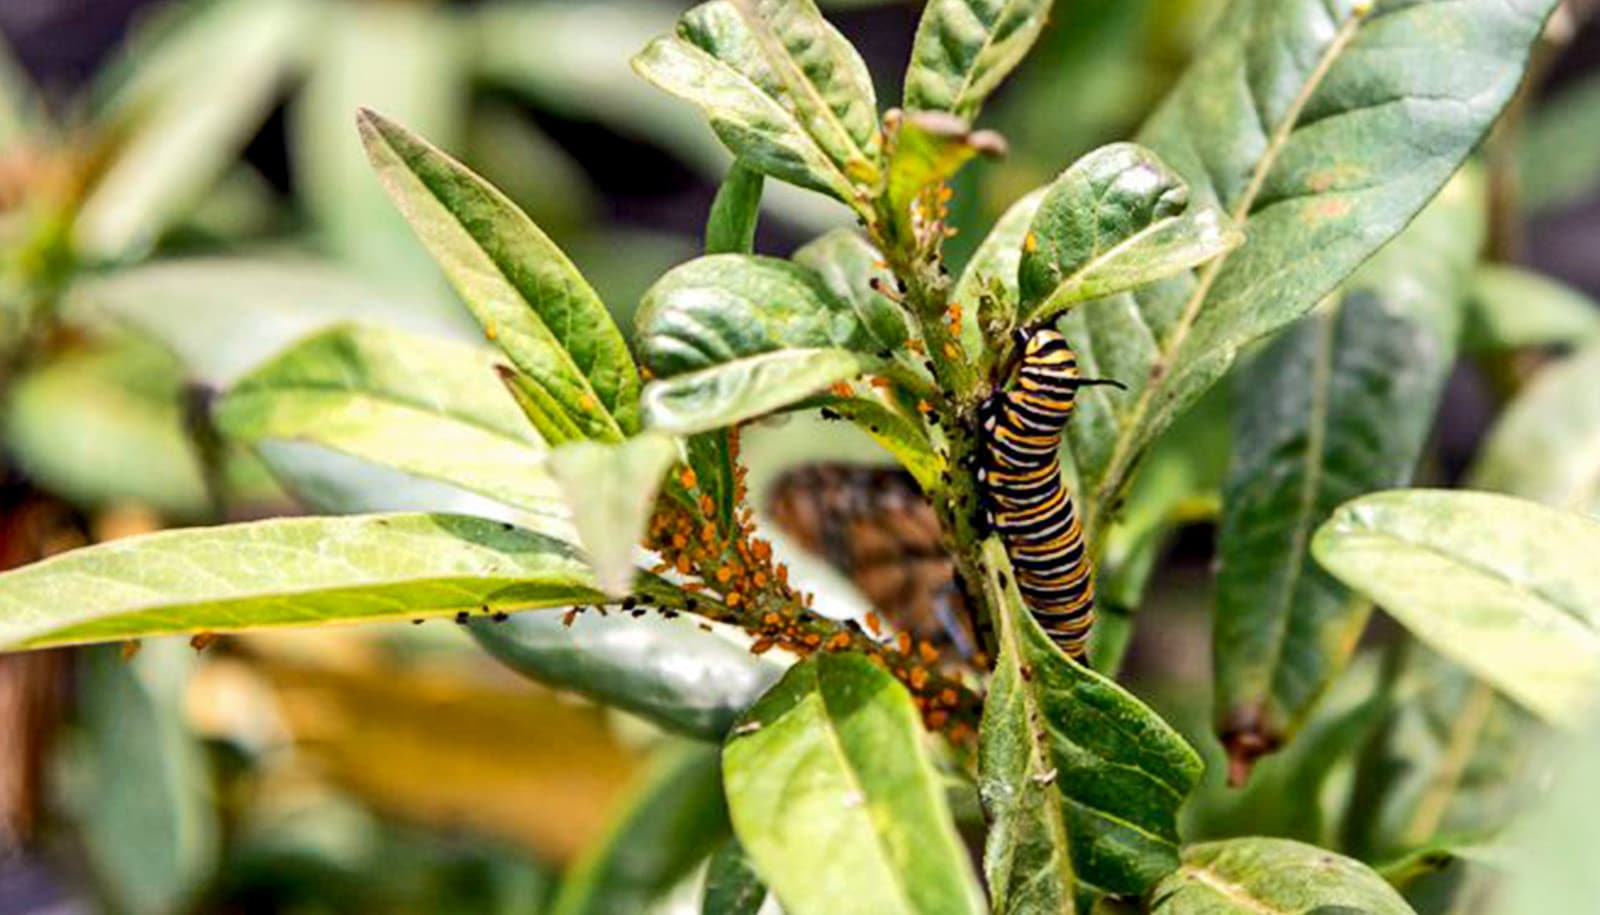 These aphids make milkweed less appealing to monarchs - Futurity